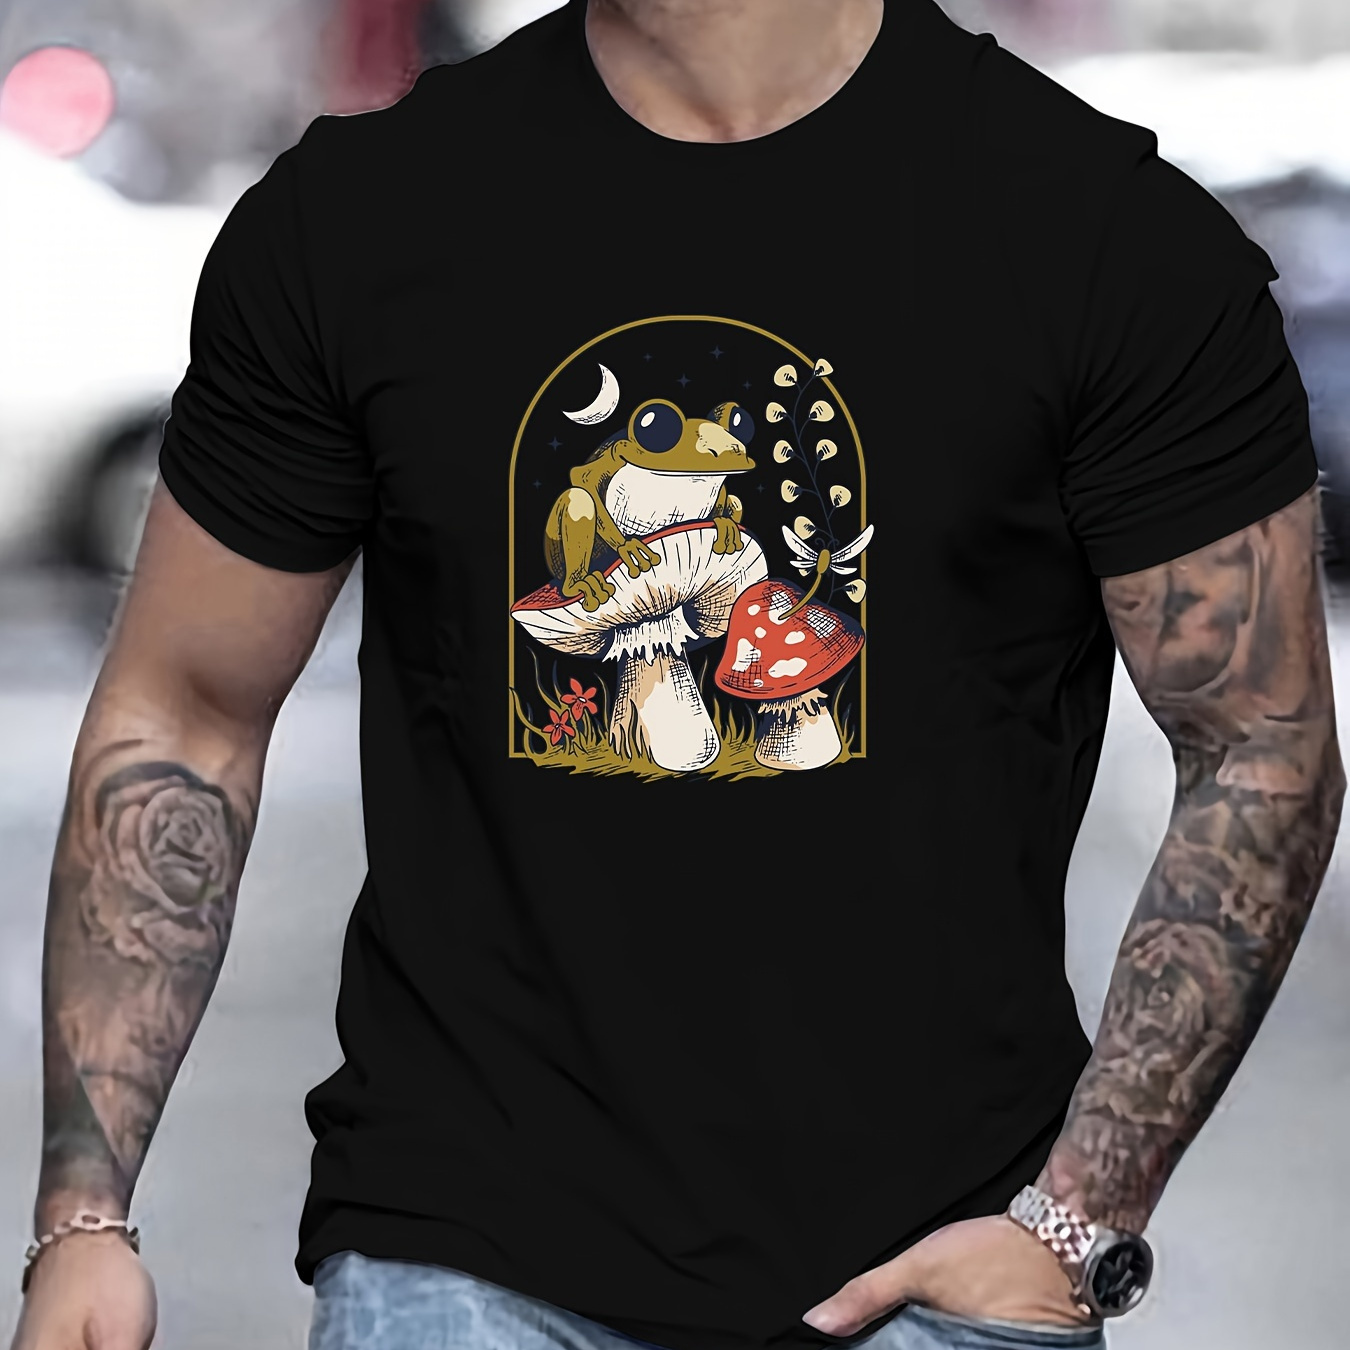 

Mushrooms And Frog Print T Shirt, Tees For Men, Casual Short Sleeve T-shirt For Summer